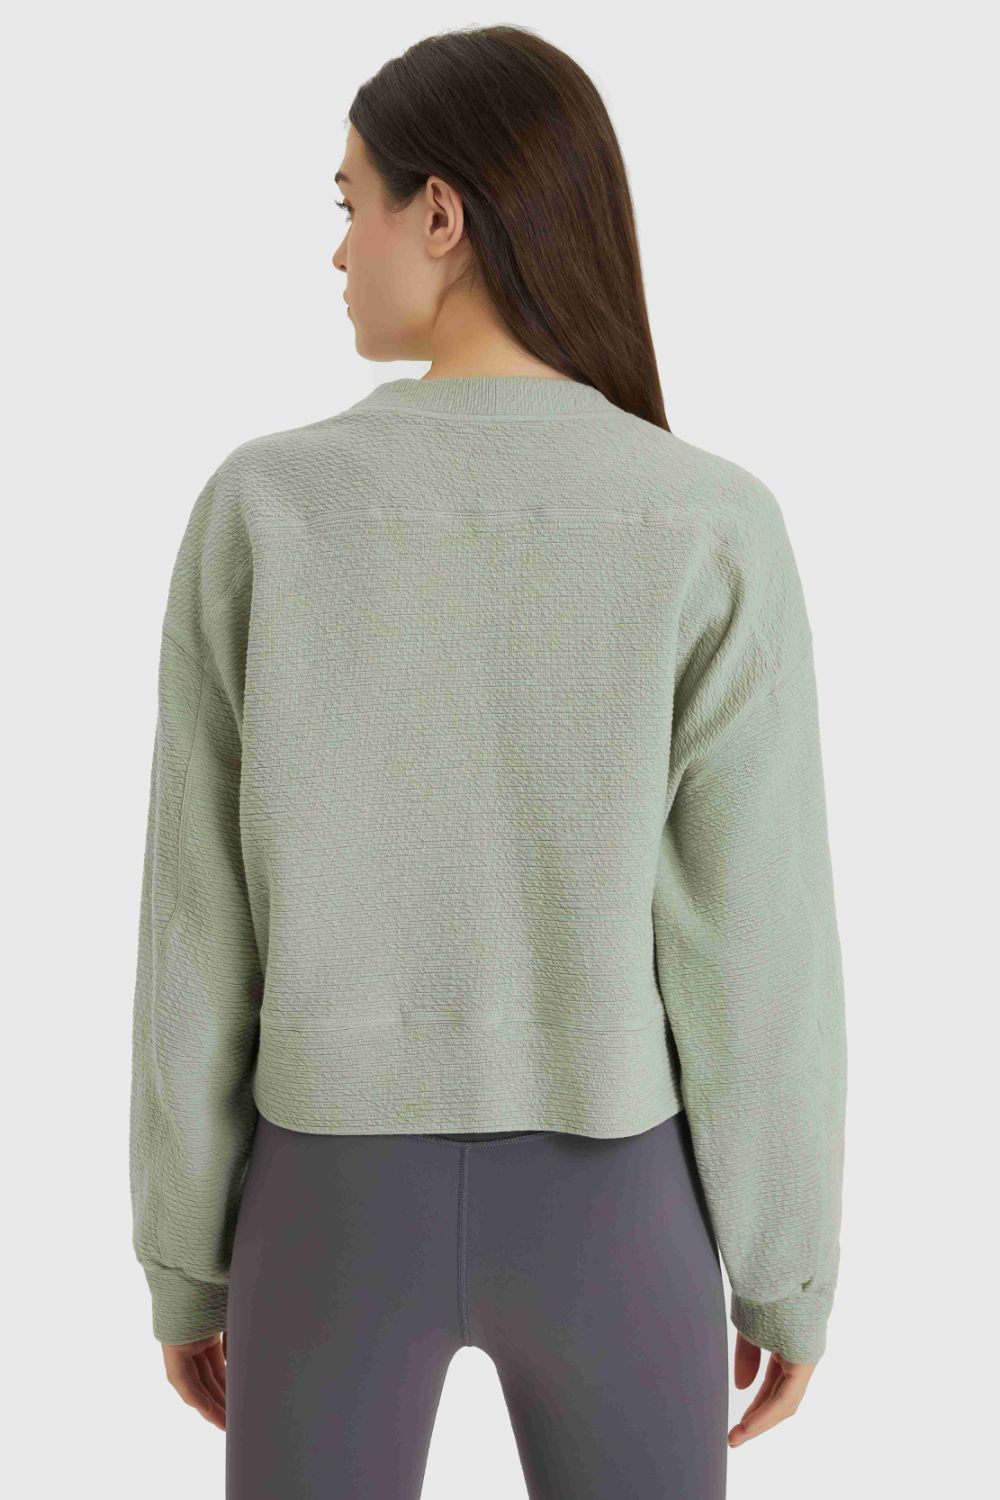 Textured Dropped Shoulder Sports Top - Groove Rabbit